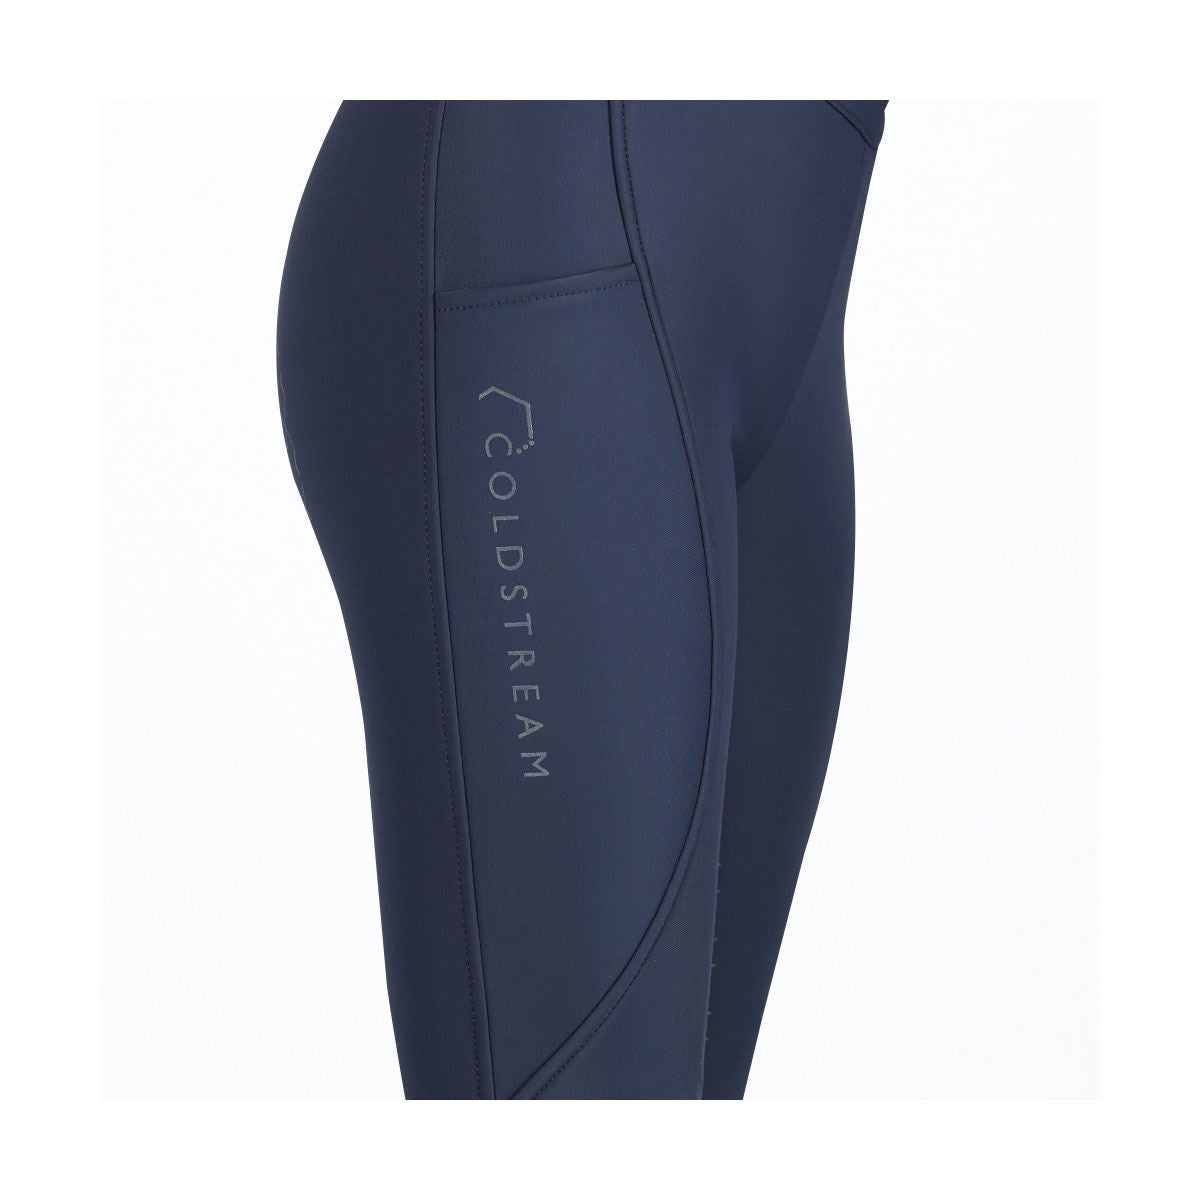 Coldstream Balmore Thermal Riding Tights - Just Horse Riders